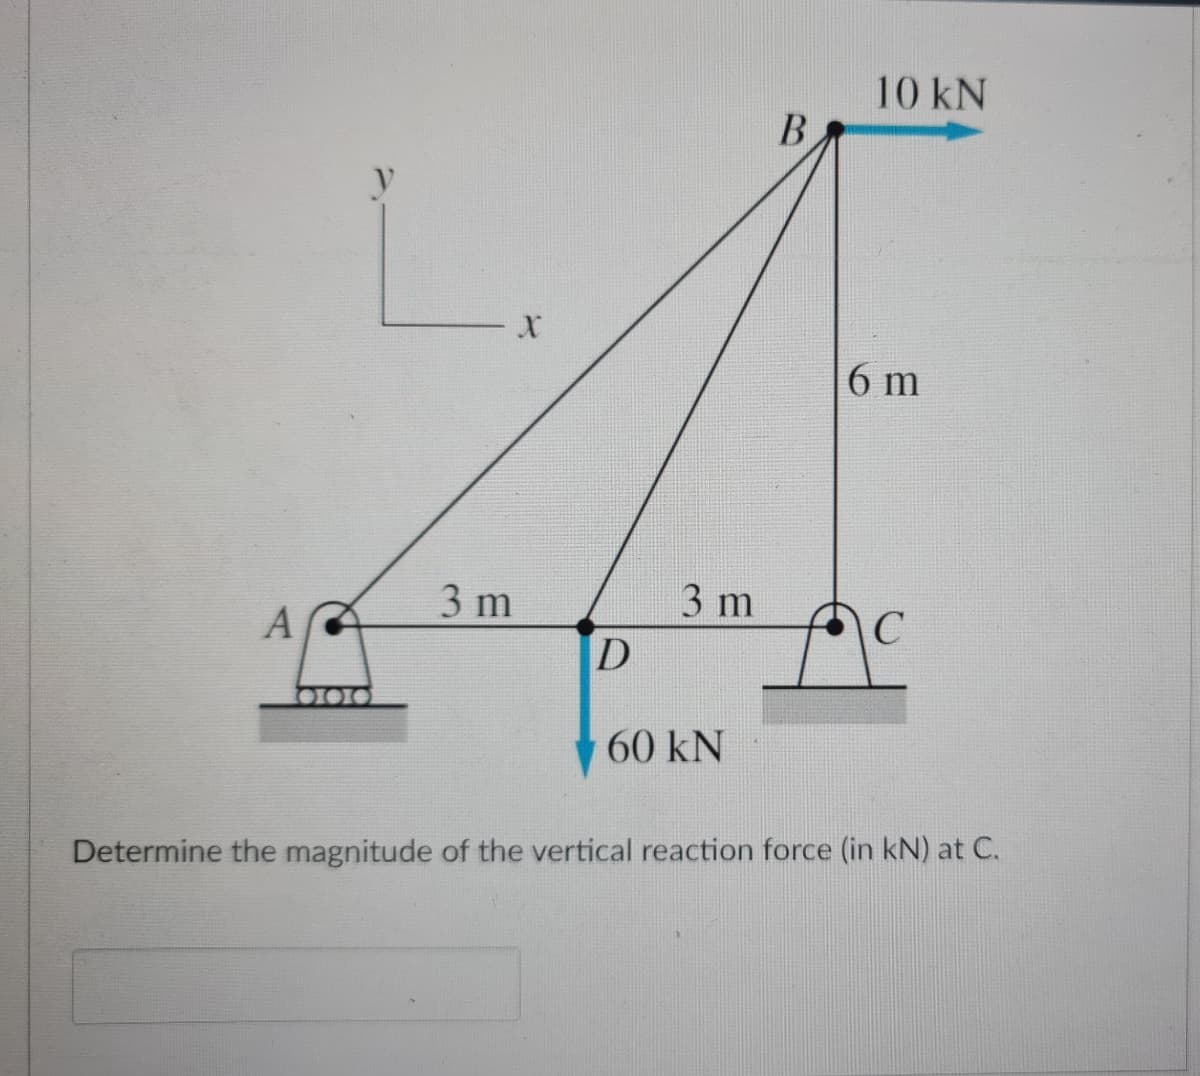 10 kN
y
6 m
3 m
3 m
D
000
60 kN
Determine the magnitude of the vertical reaction force (in kN) at C.
